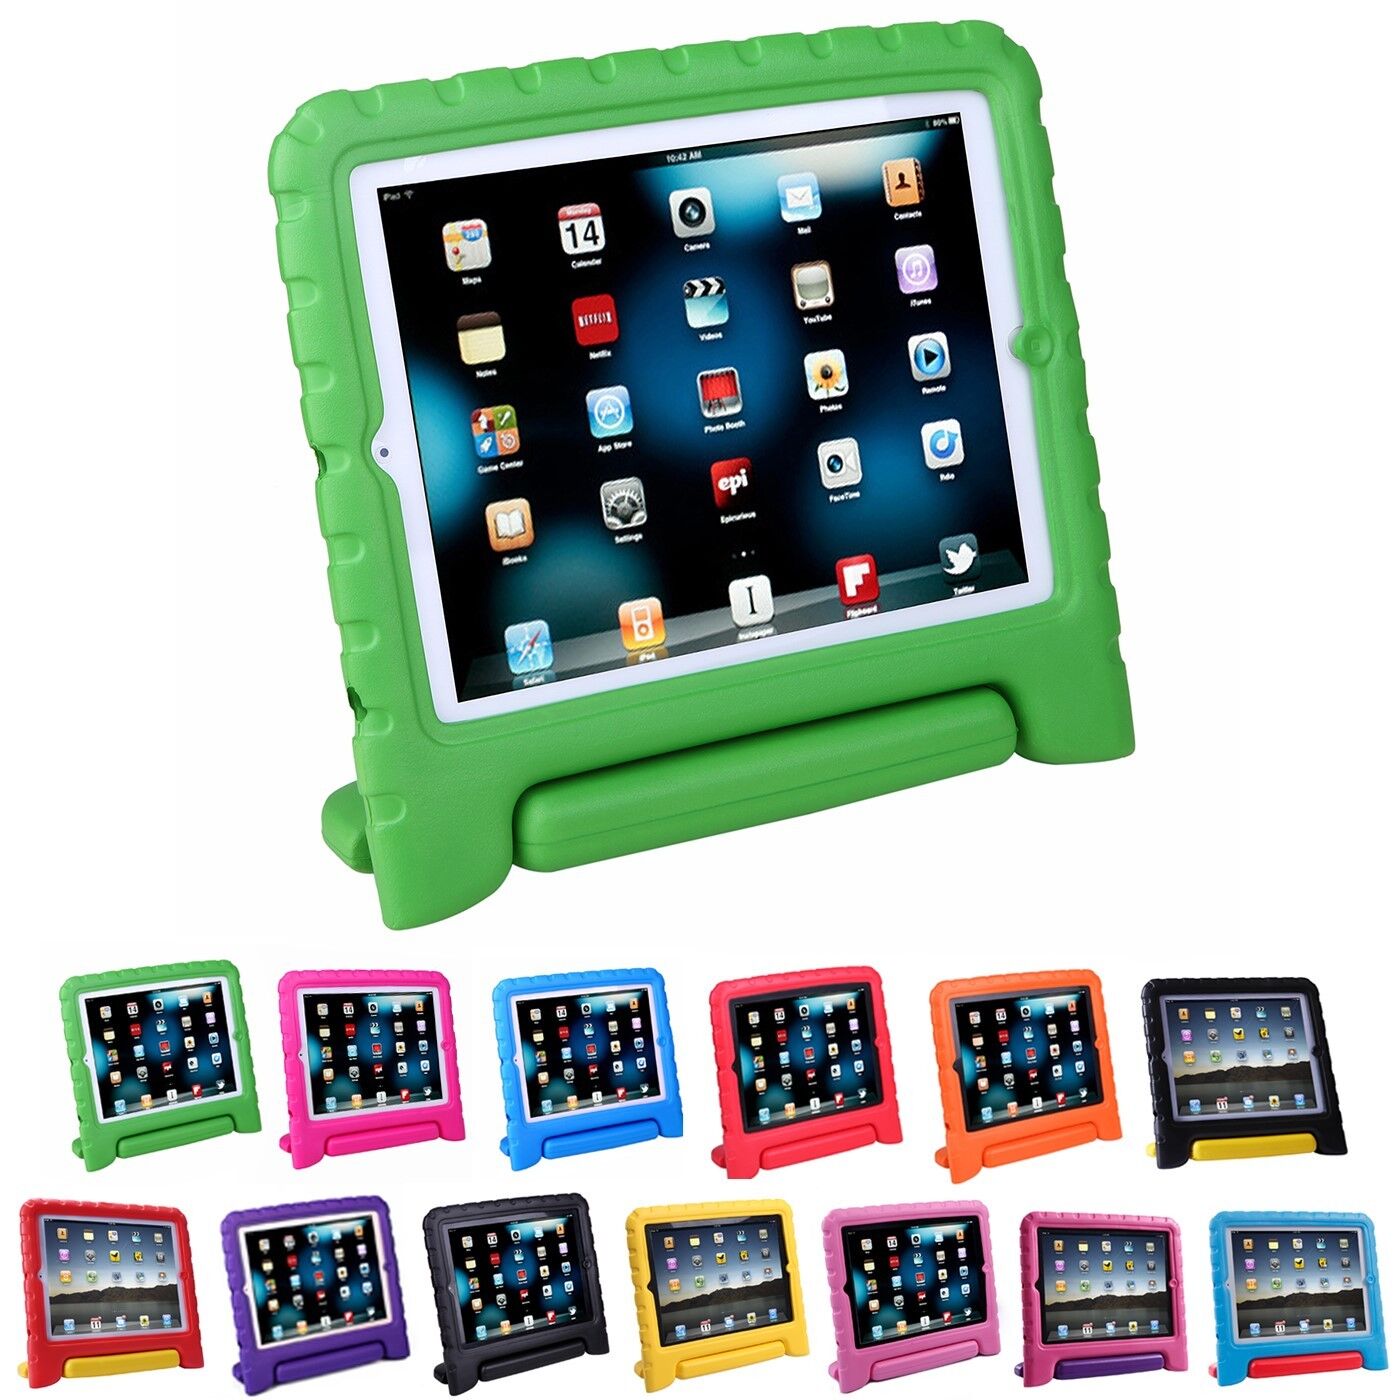 Shock Proof iPad Case for Kids Bumper Cover Handle Stand for Apple iPad 2/3/4 HDE HDE-C100